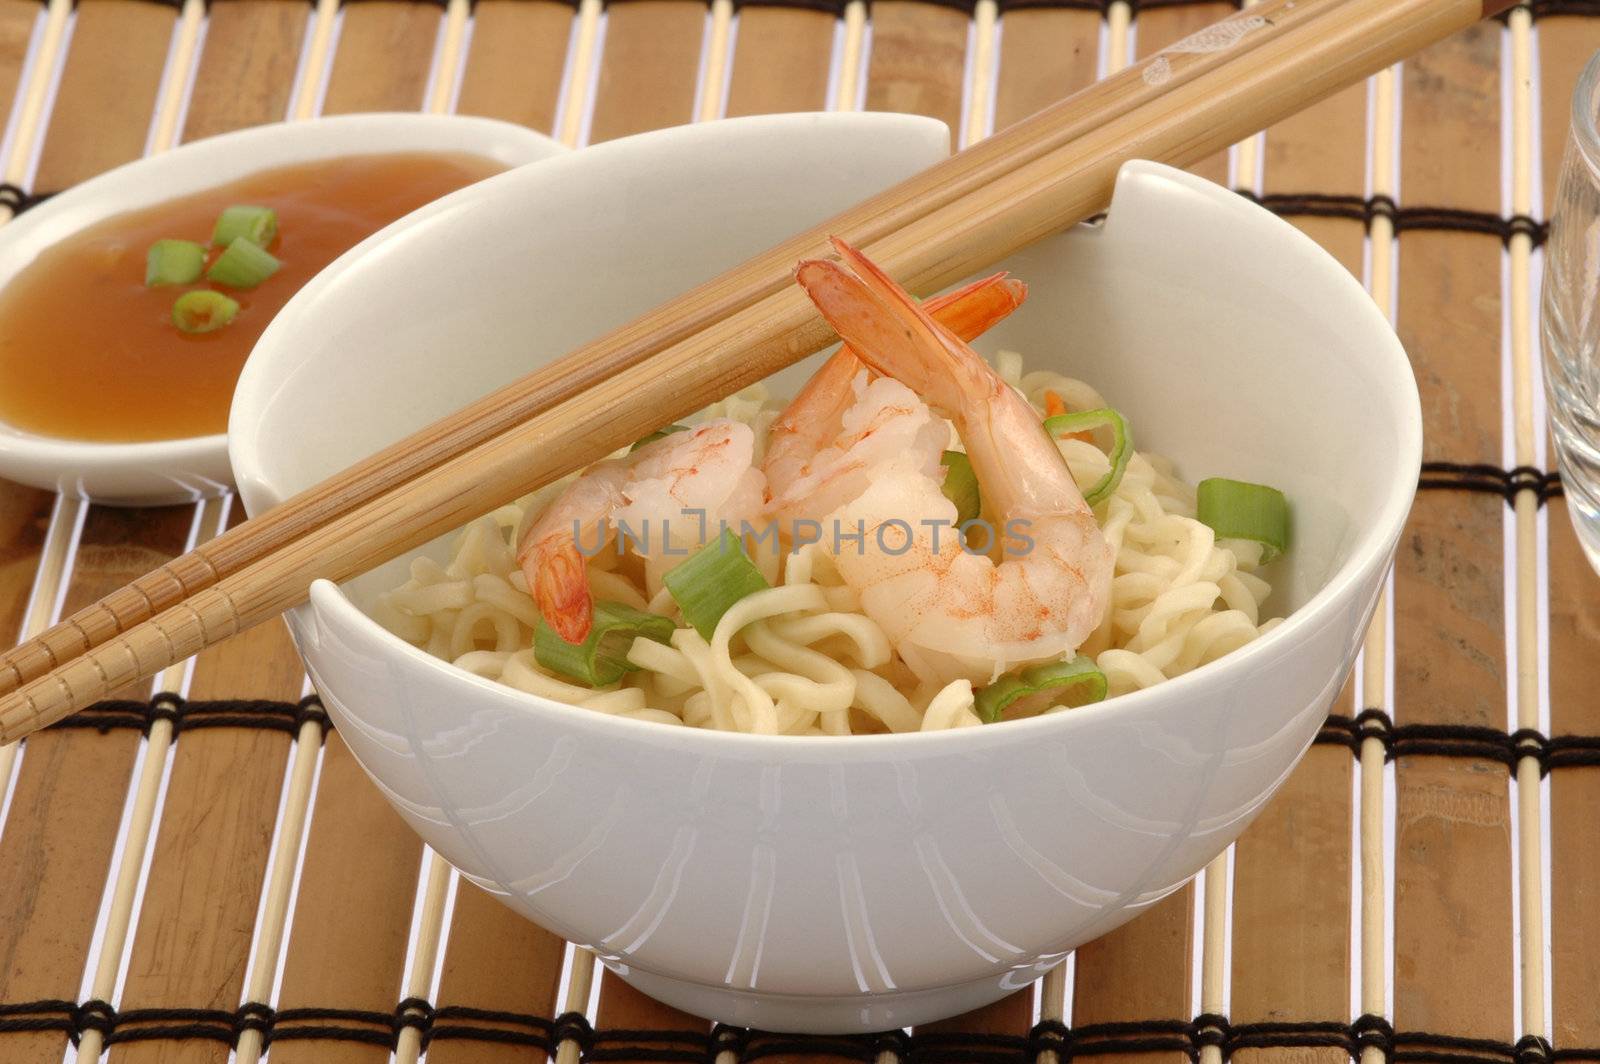 Noodles and Shrimp by billberryphotography